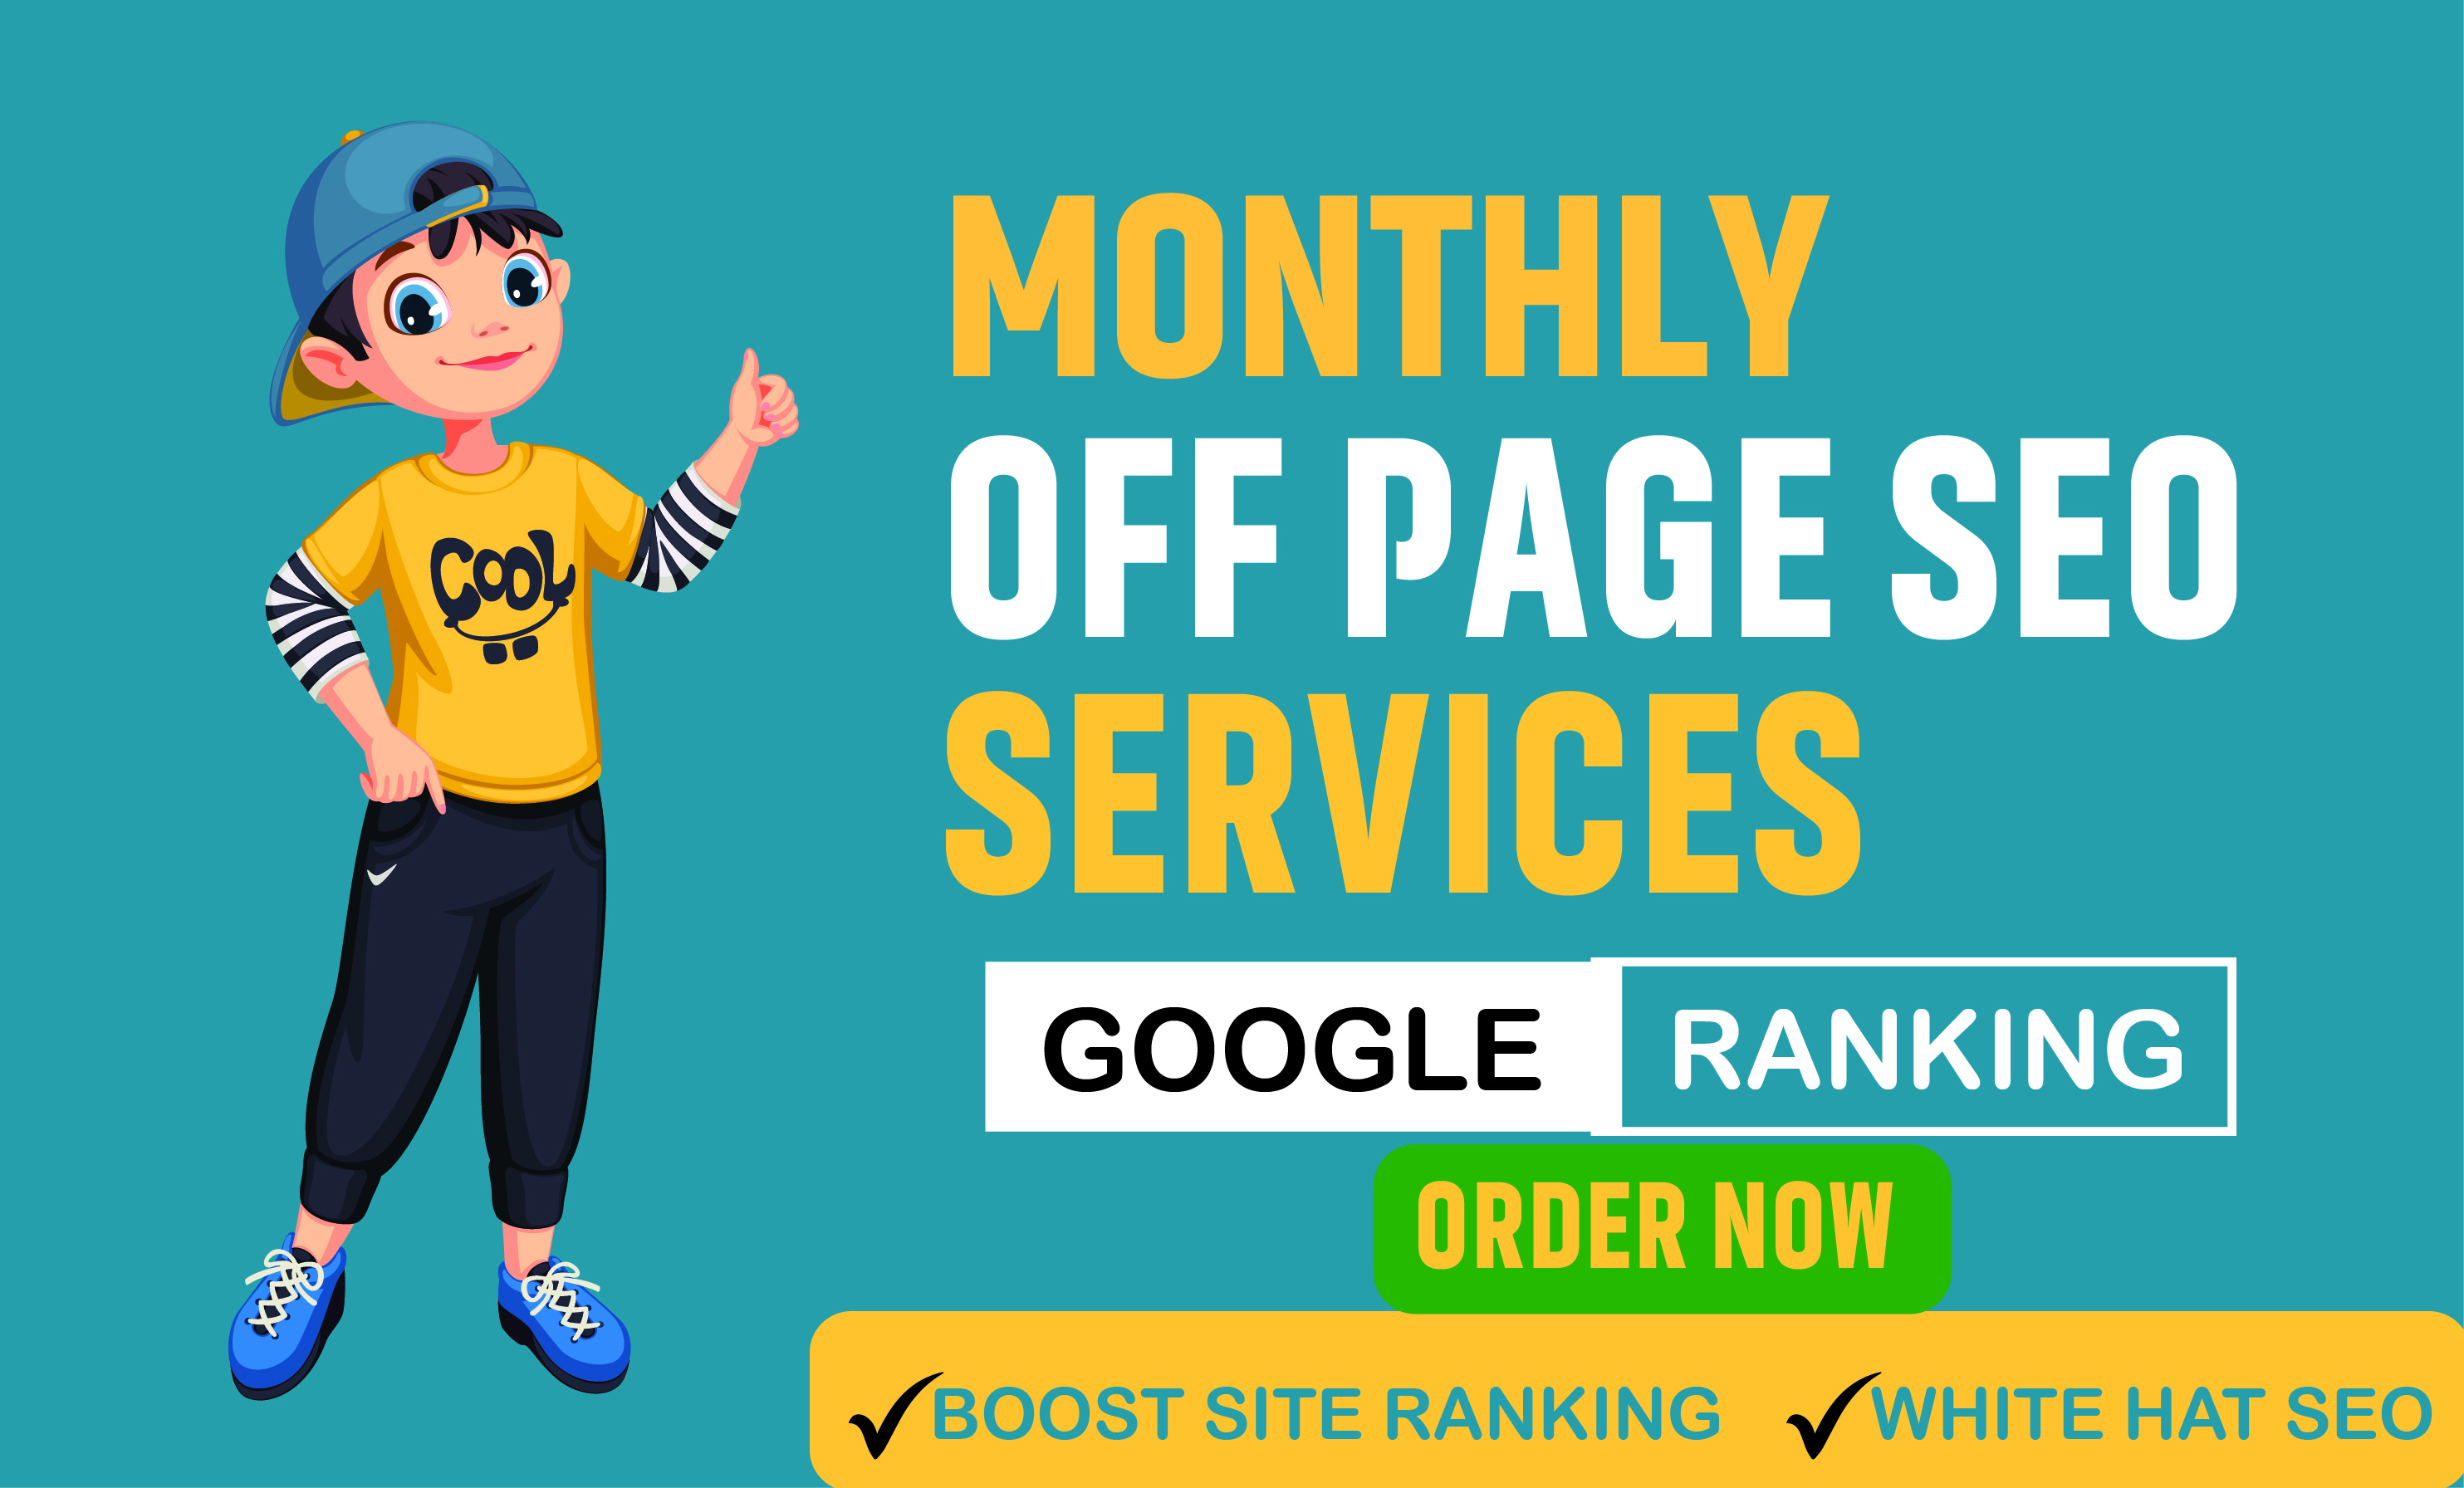 I will do monthly off page SEO service with white hat link building